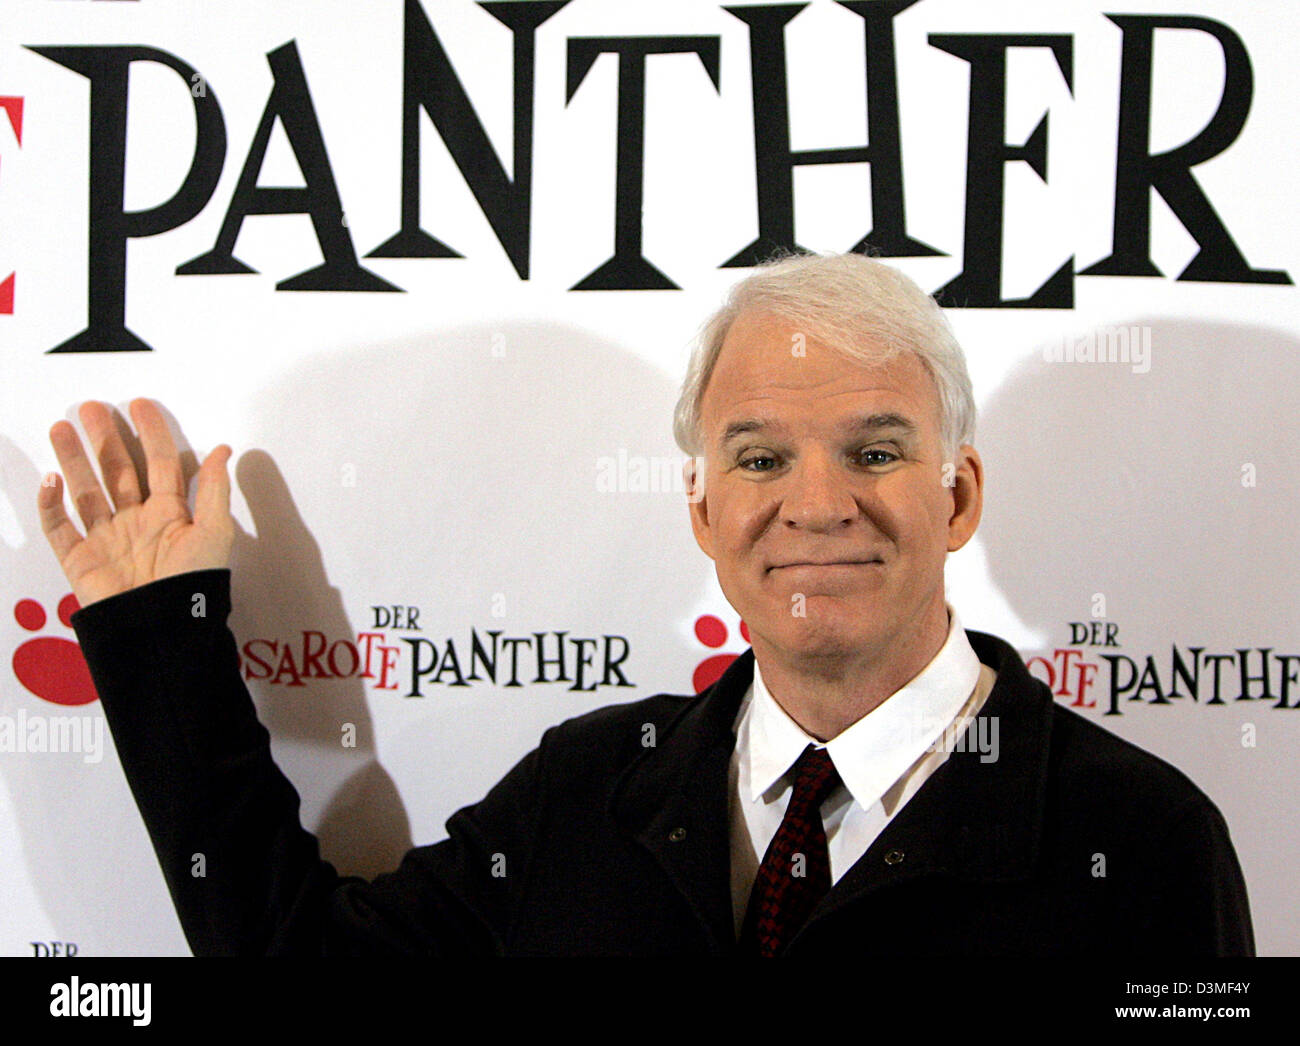 US actor Steve Martin poses in front of a poster wall for his new film 'The Pink Panther' during a photocall in Berlin, Friday, 24 February 2006. The film will be released in Germany on 09 March 2006. Photo: Jens Kalaene Stock Photo